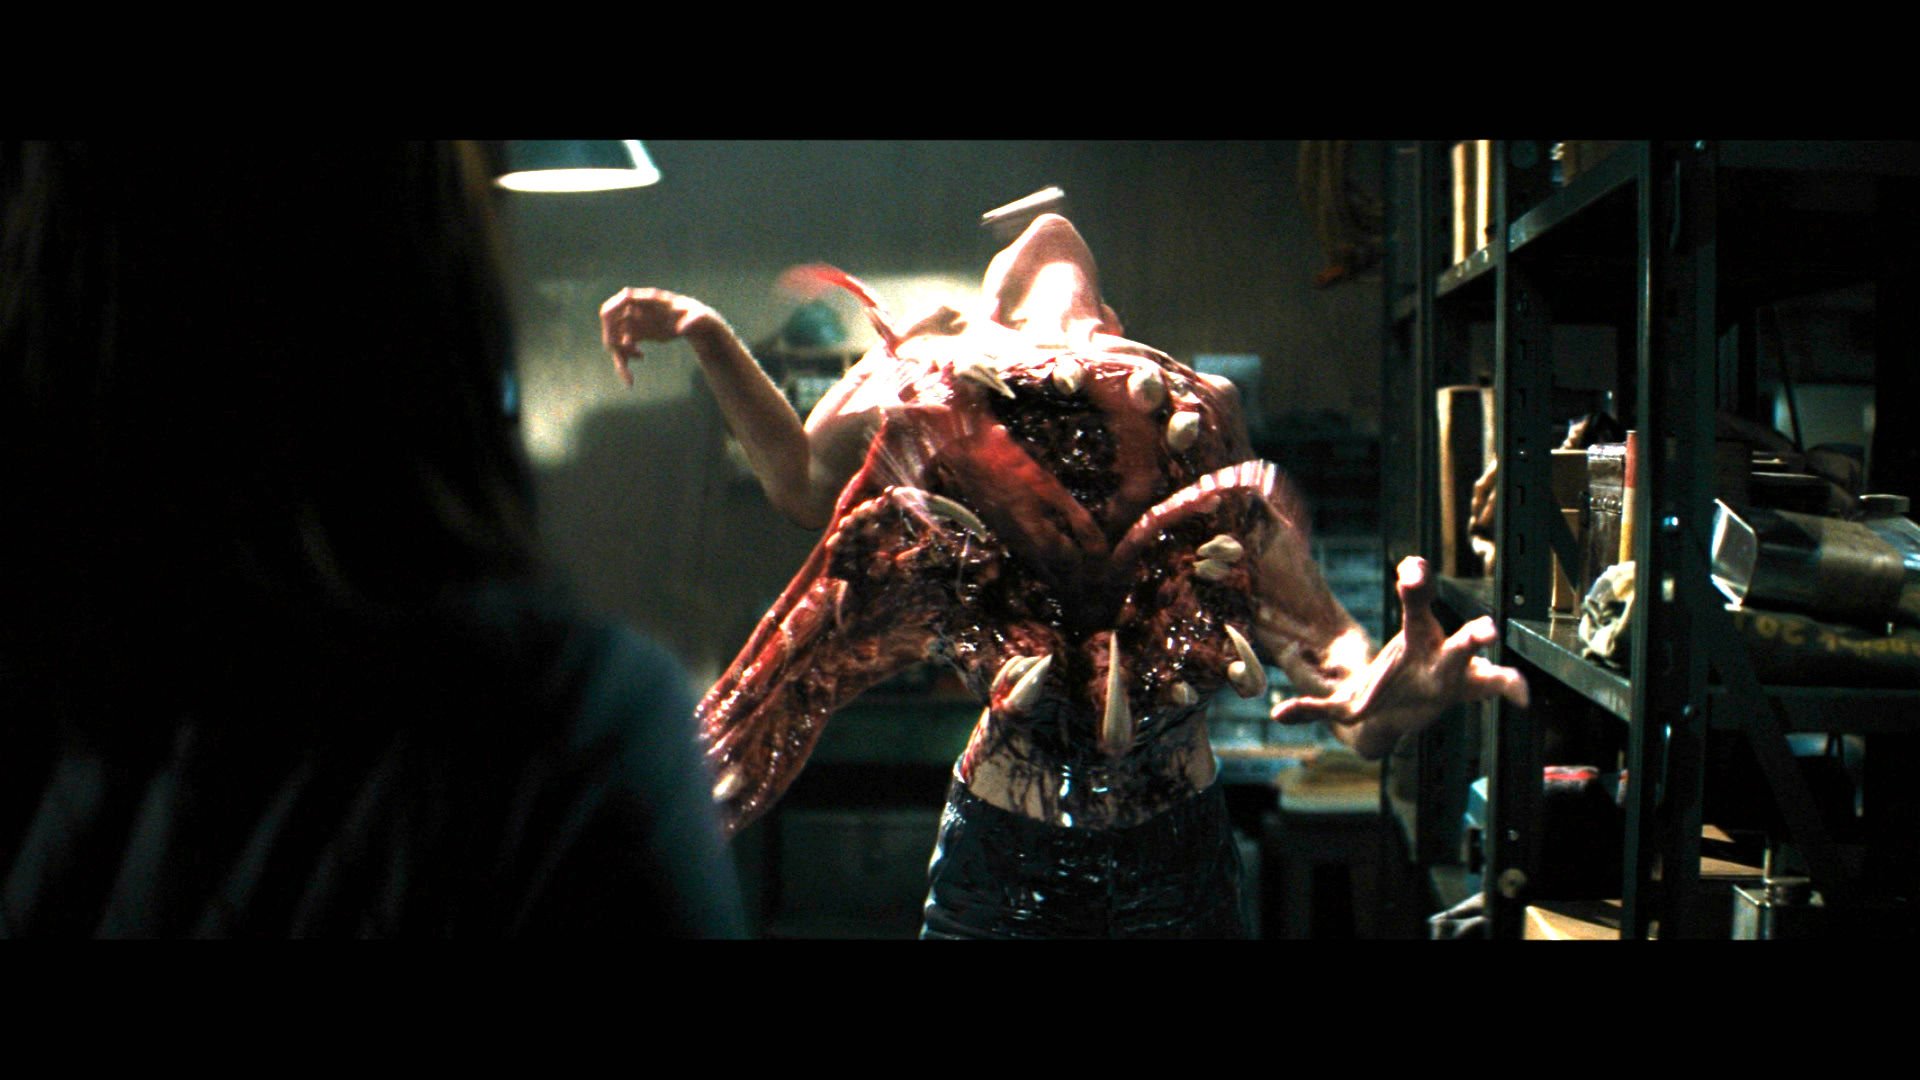 movie, the thing (2011)